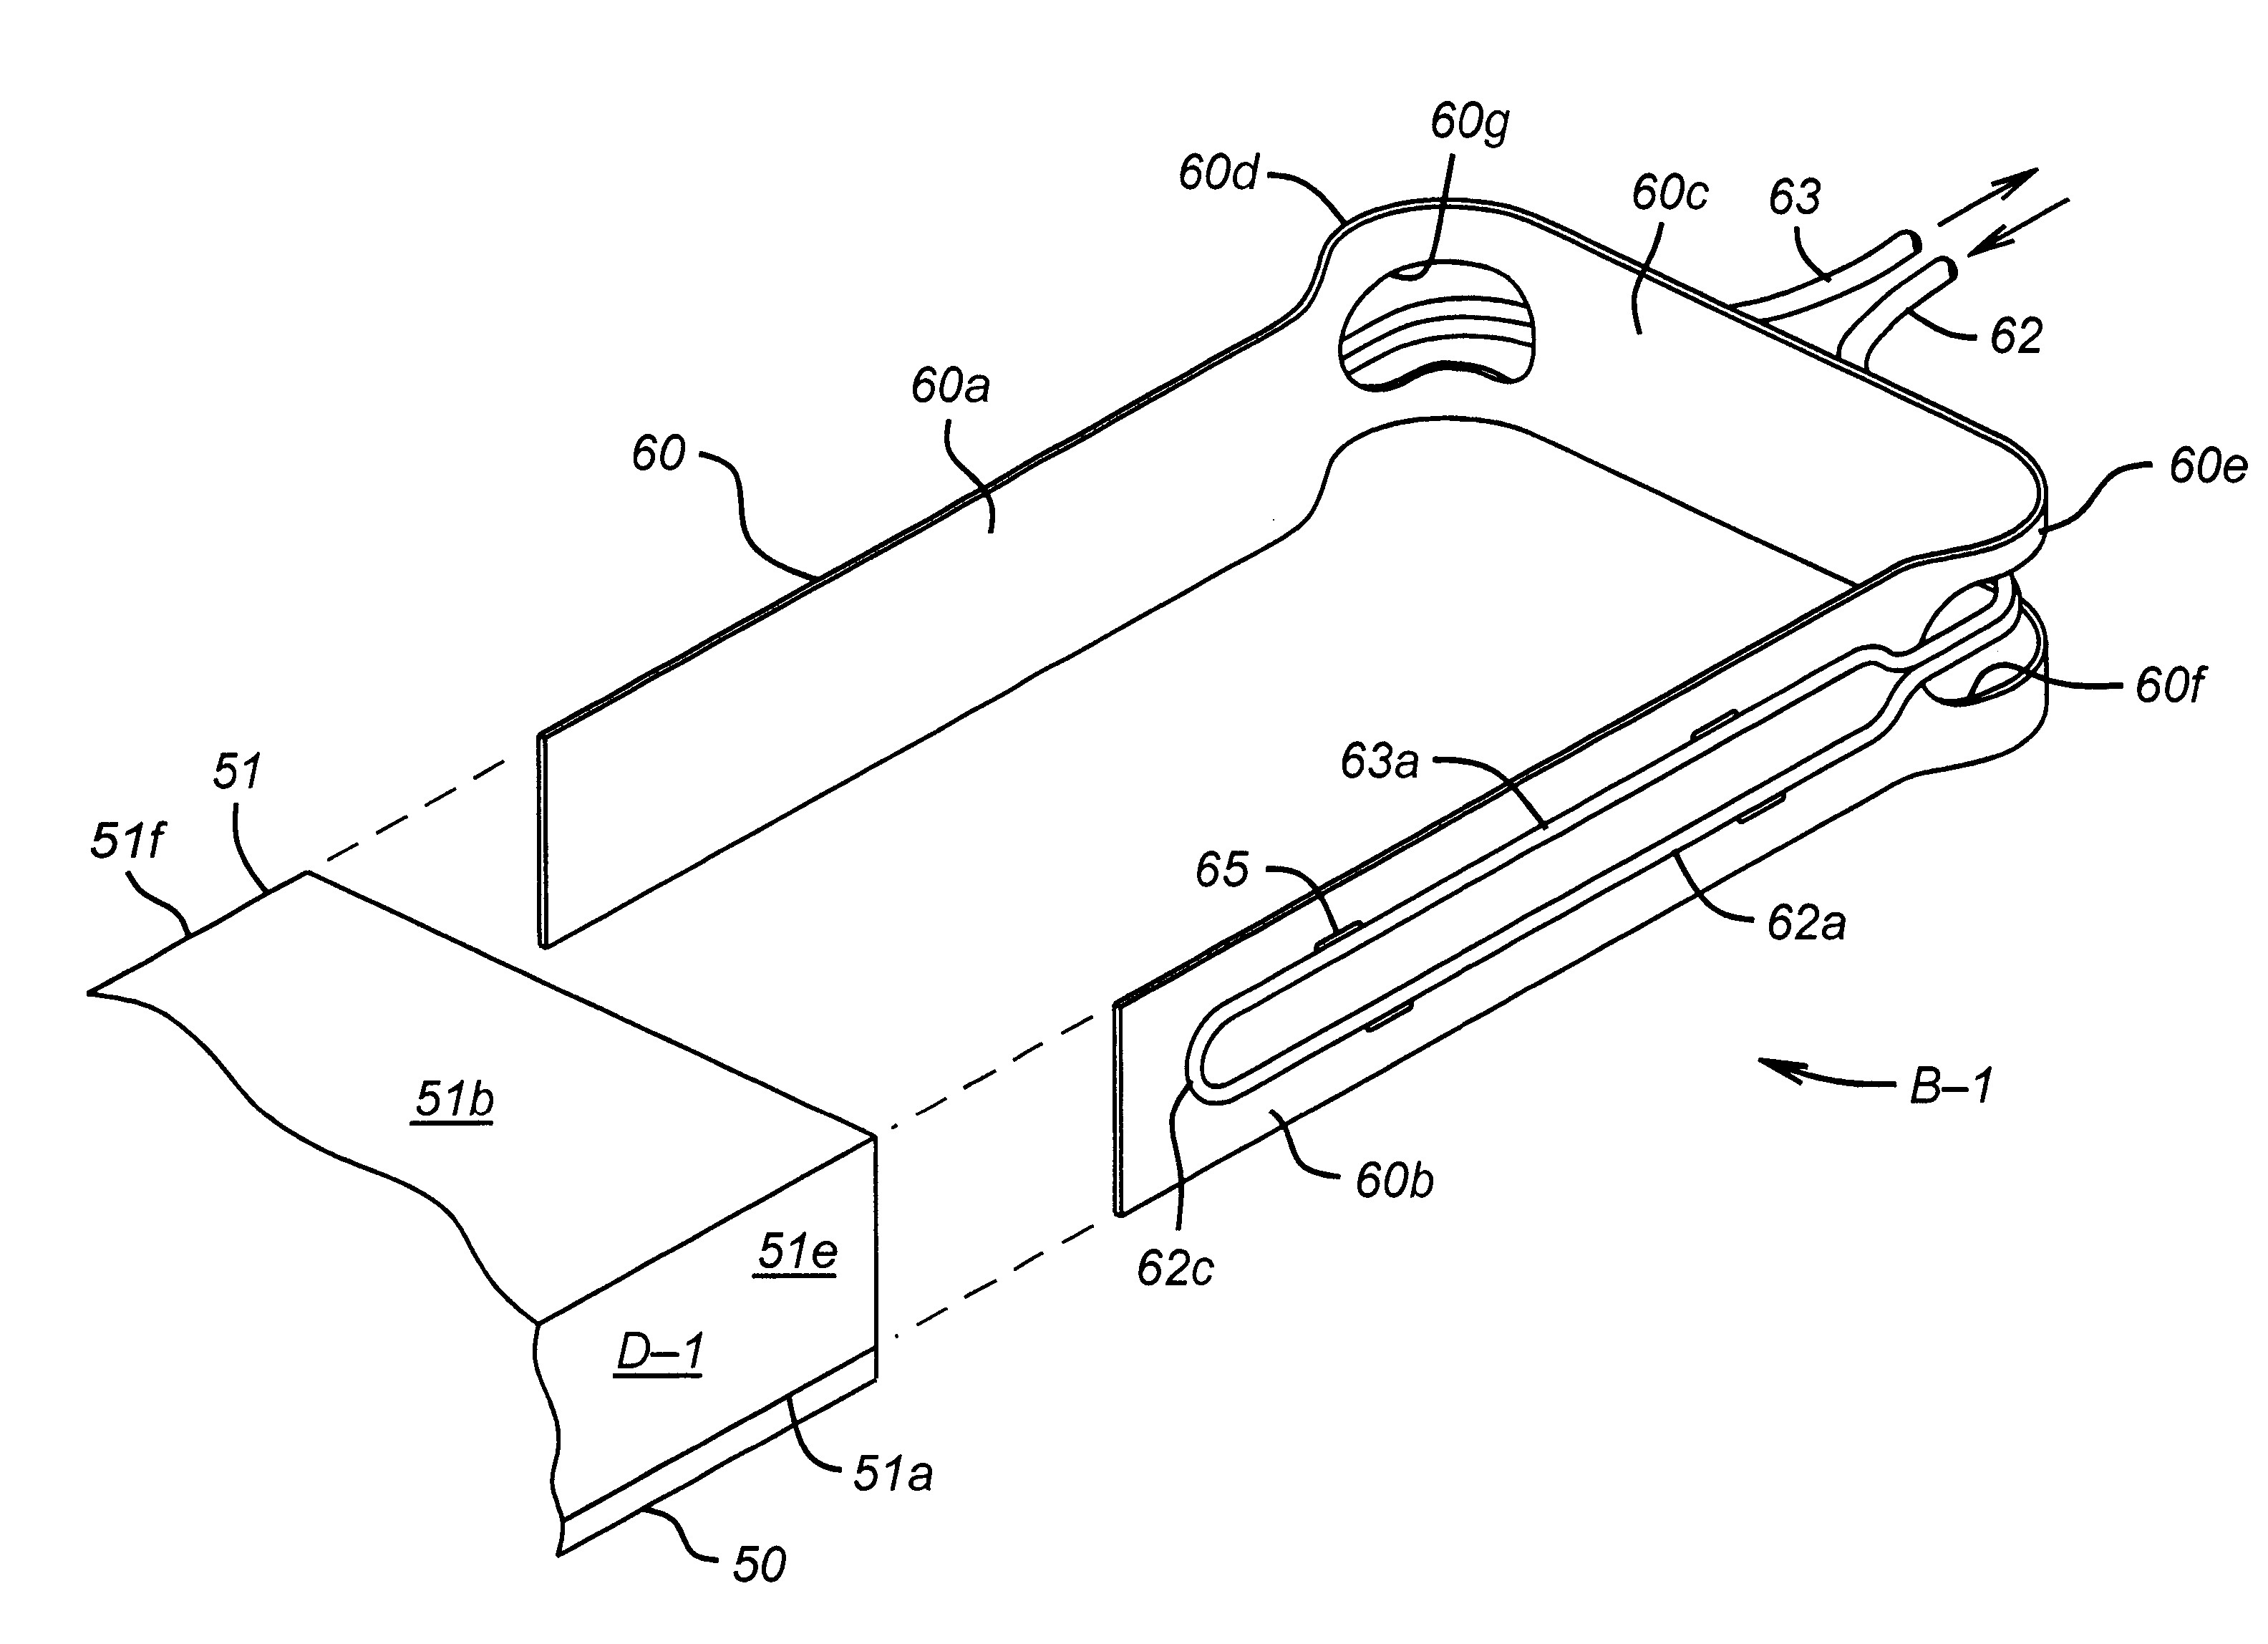 Apparatus for liquid cooling of specific computer components